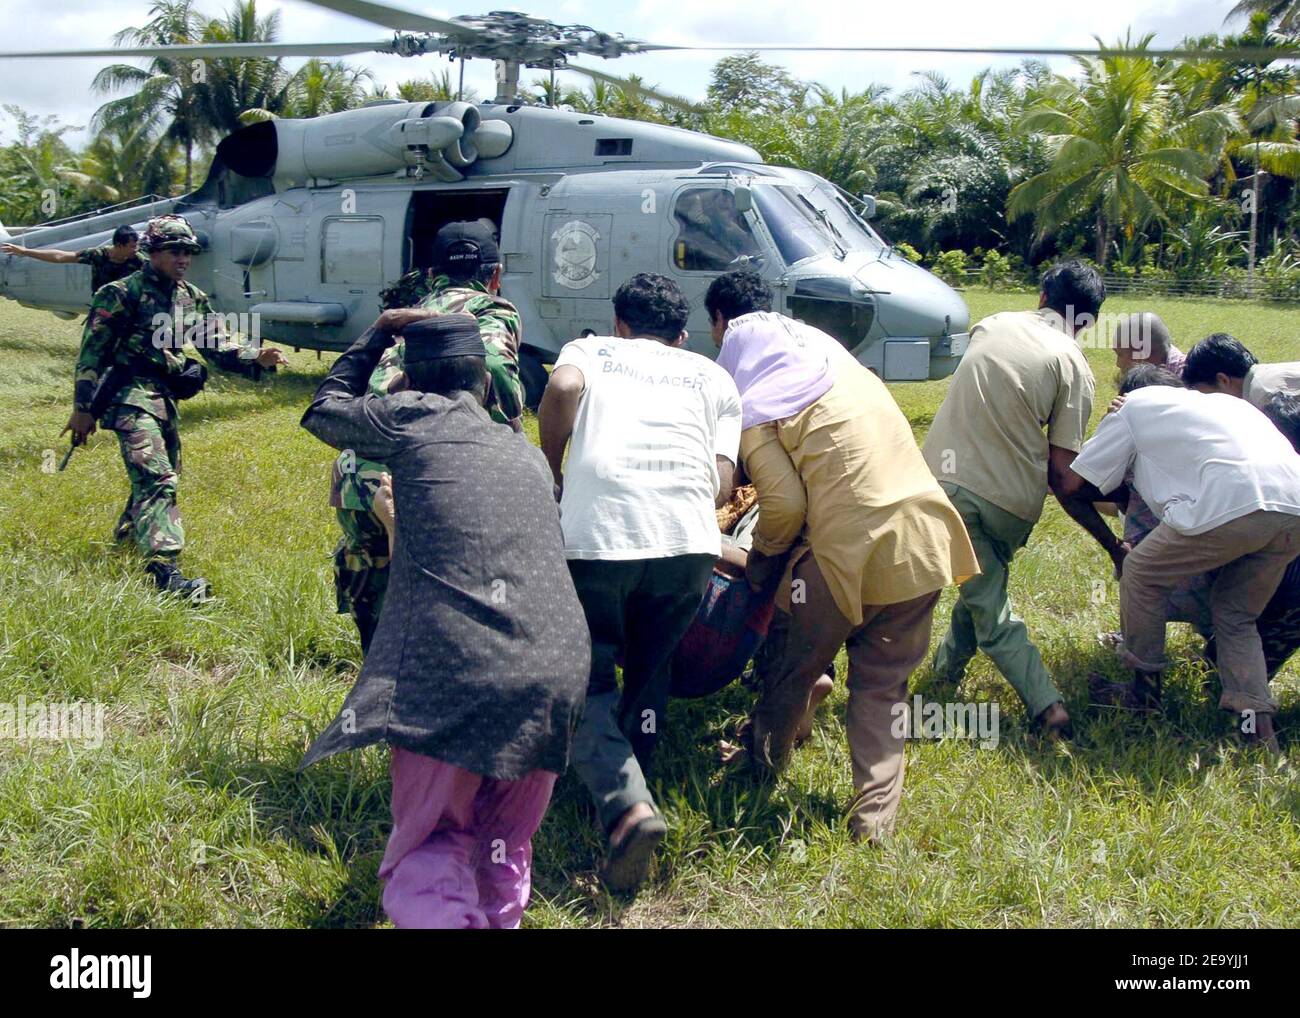 Indonesian civilians rush to load their injured into an SH-60B Seahawk helicopter, assigned to the Saberhawks of Anti-Submarine Squadron Light Four Seven (HSL-47), during a humanitarian aid mission to Aceh, Sumatra, Indonesia. Helicopters and aircraft assigned to Carrier Air Wing Two (CVW-2) and Sailors from Lincoln are conducting humanitarian operations in the wake of the Tsunami that struck South East Asia. Photo by Tyler J. Clements/USN via ABACA Stock Photo